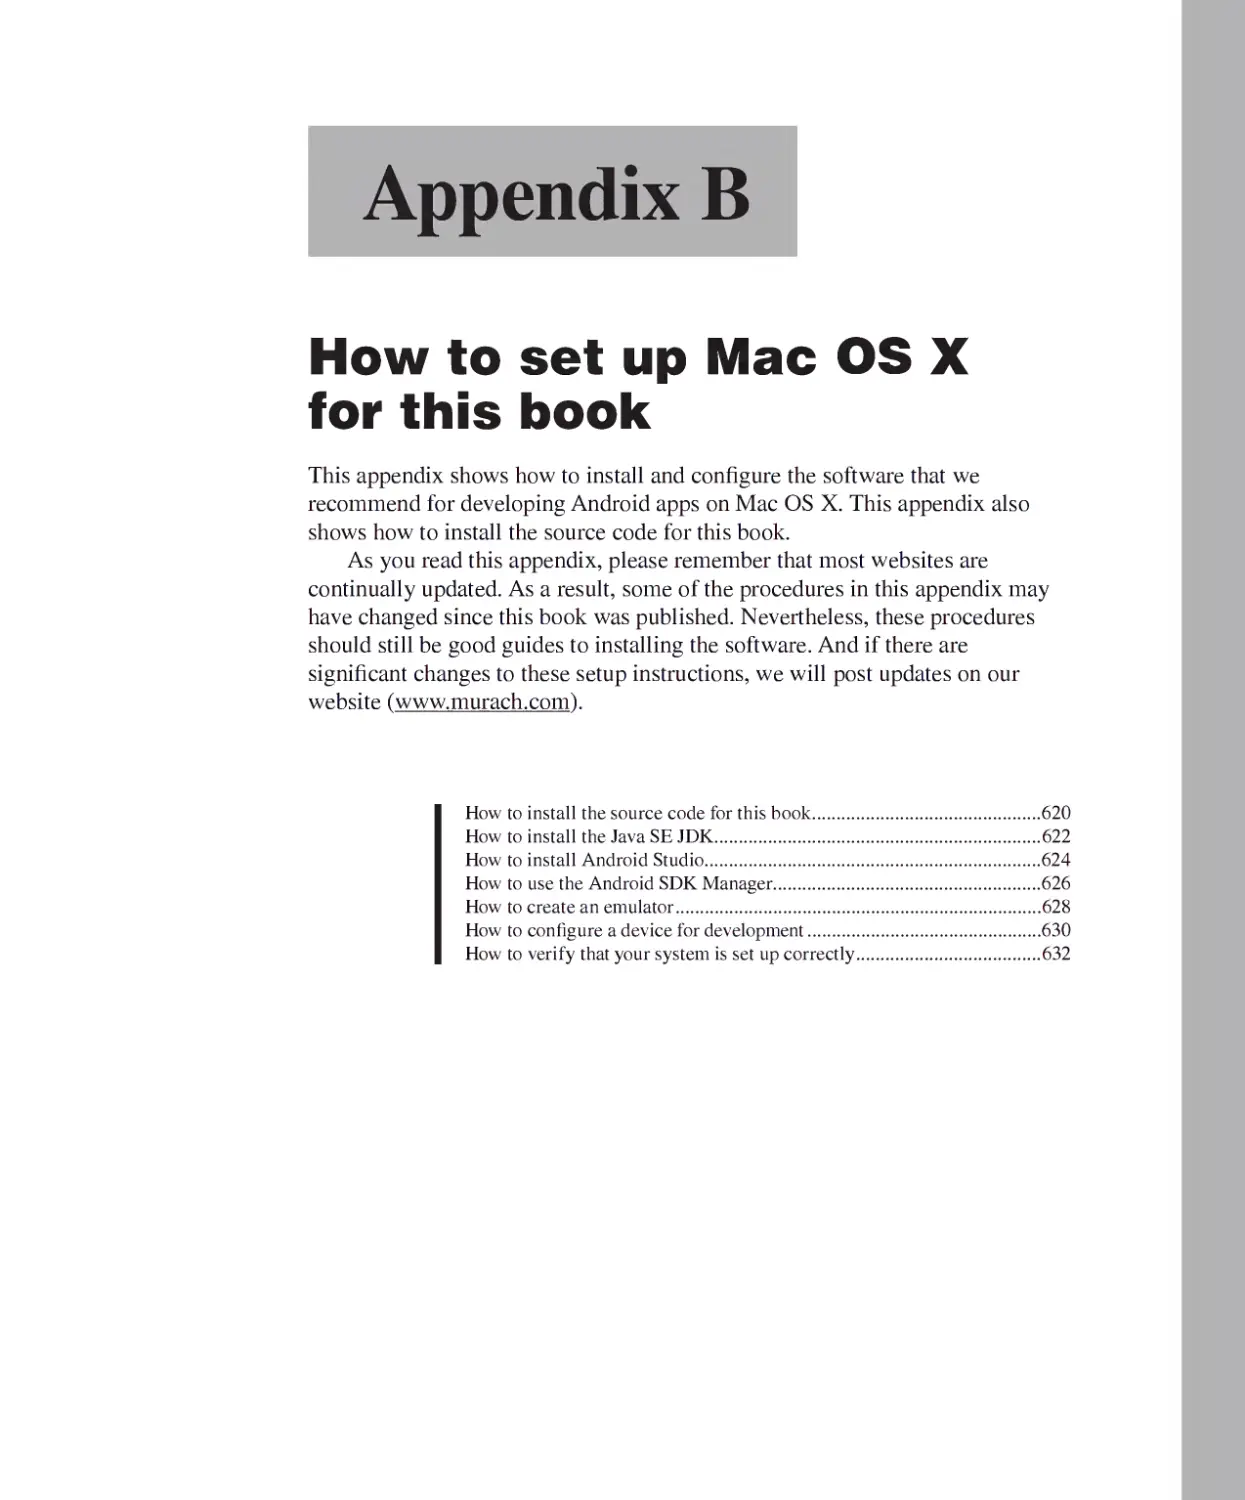 Appendix B - How to Set Up Mac OS X for This Book